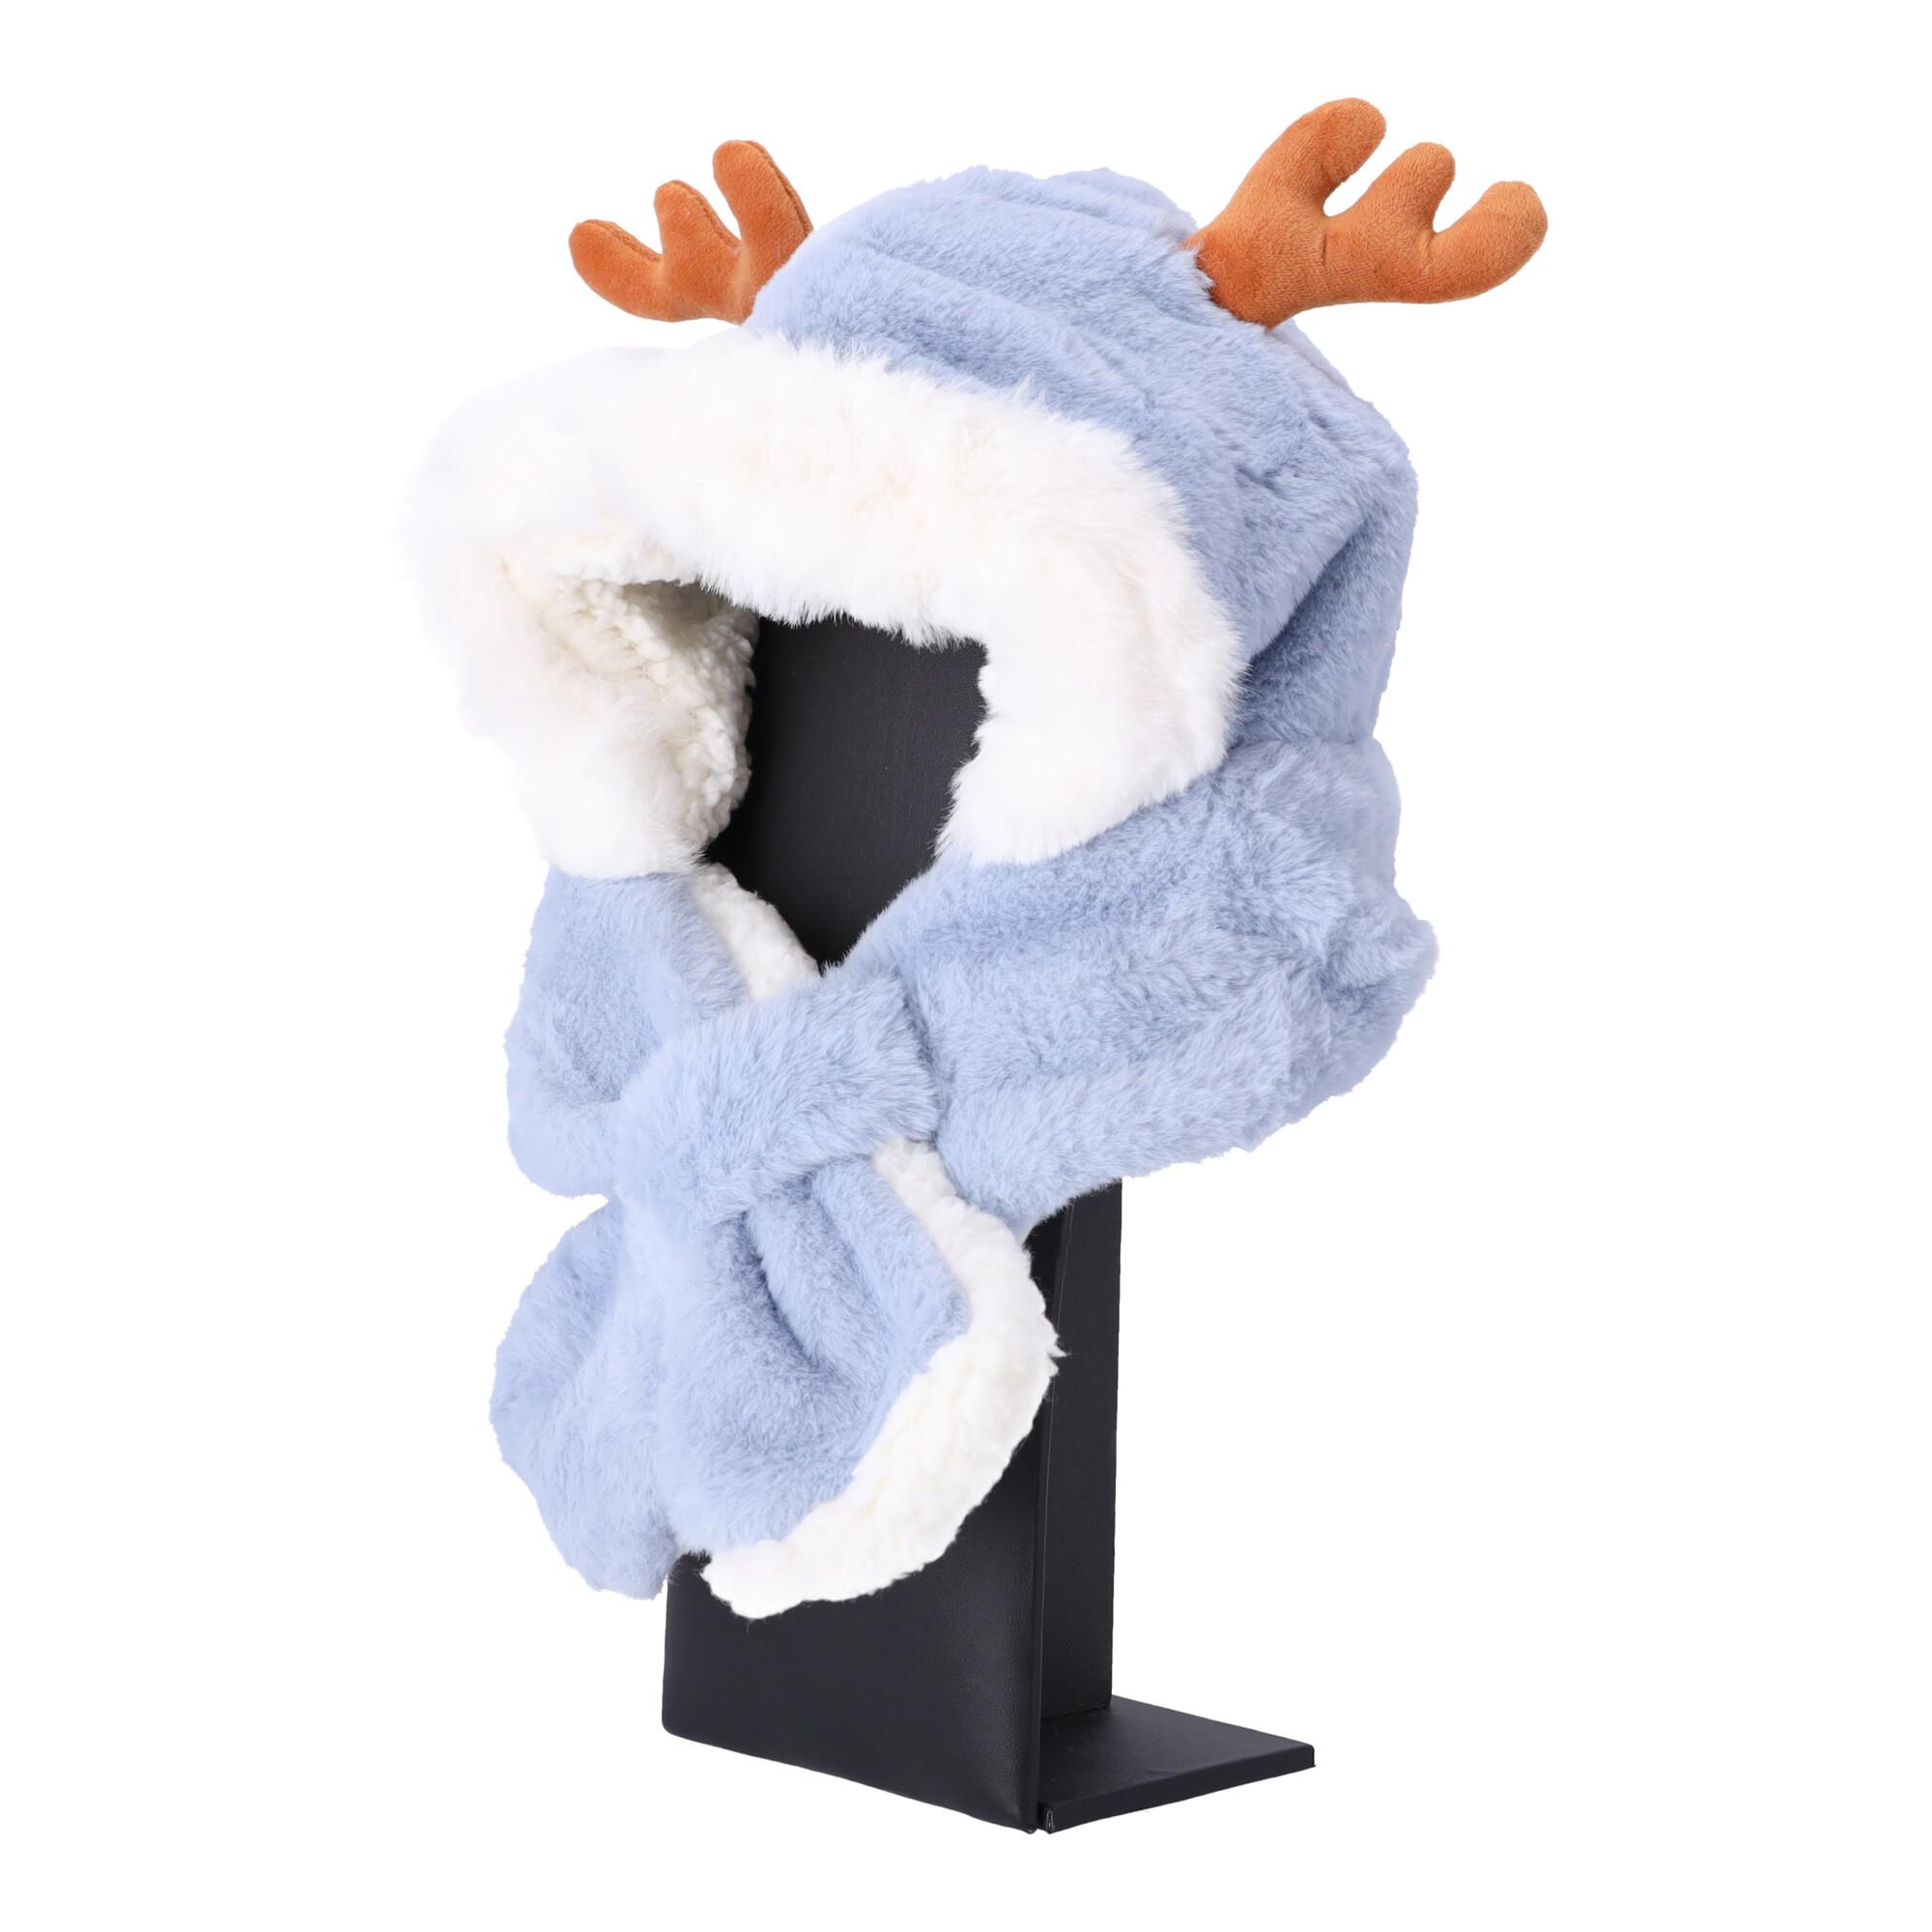 Children's plush hat with a scarf for children aged 1 to 7 – light blue with deer ears